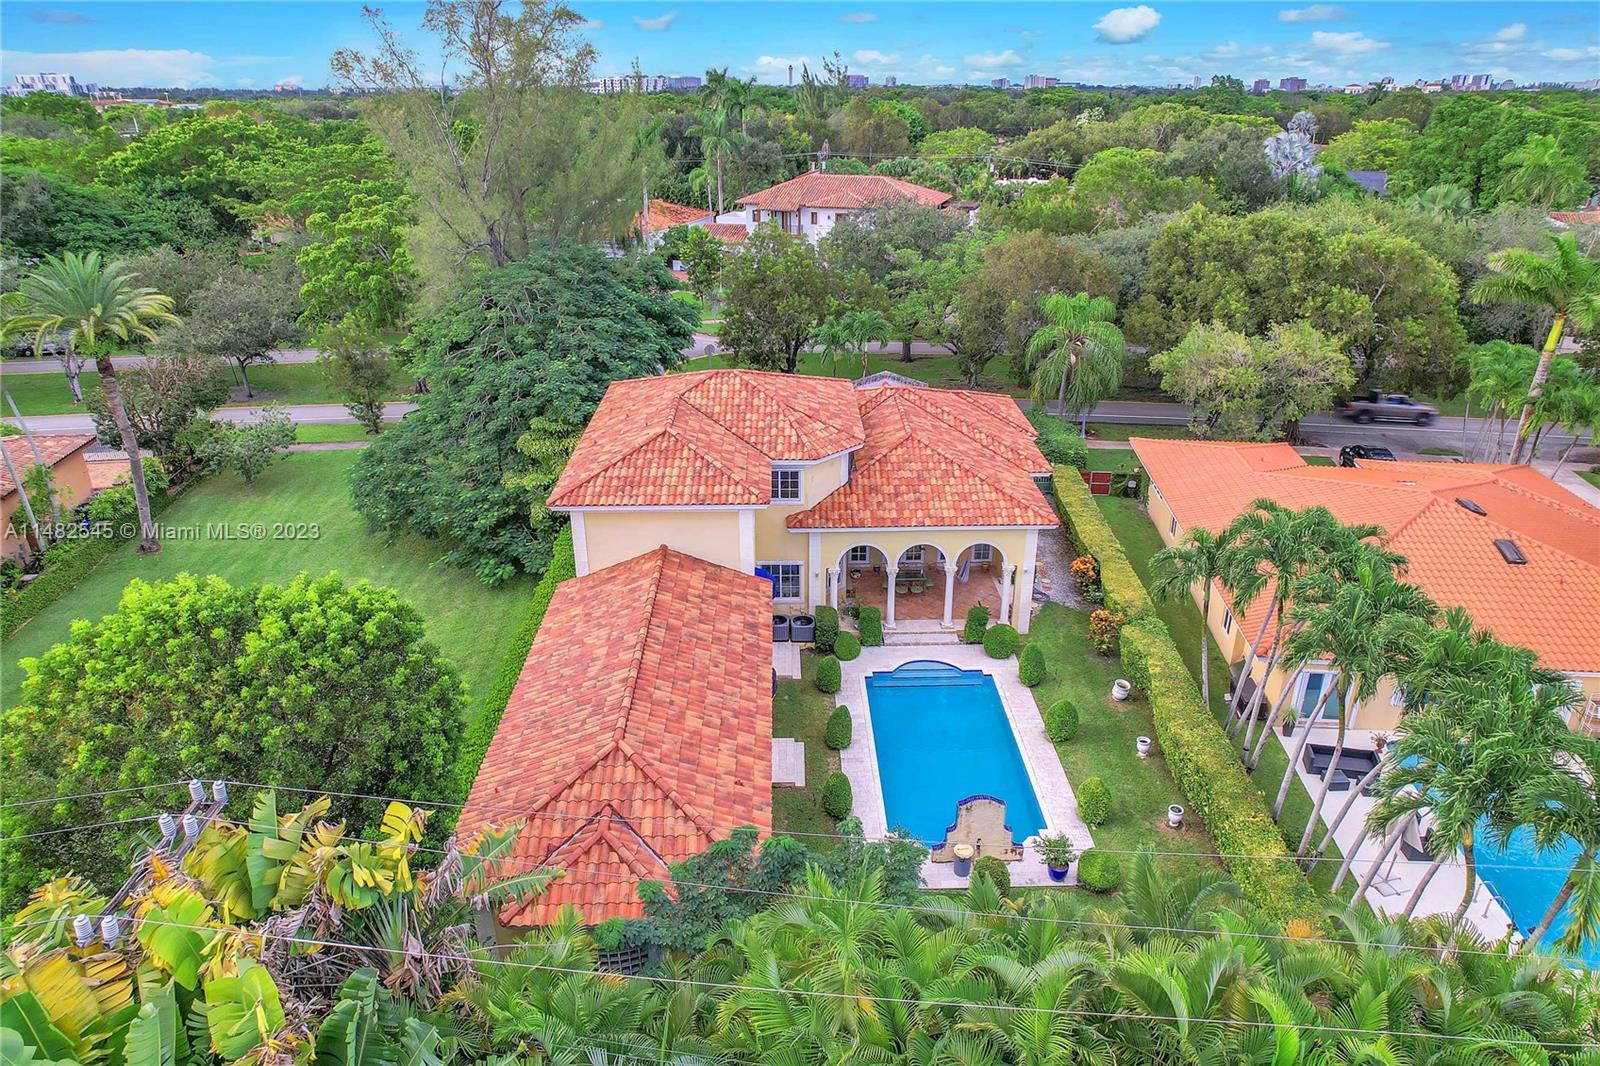 Photo of 1334 Alhambra Cir in Coral Gables, FL